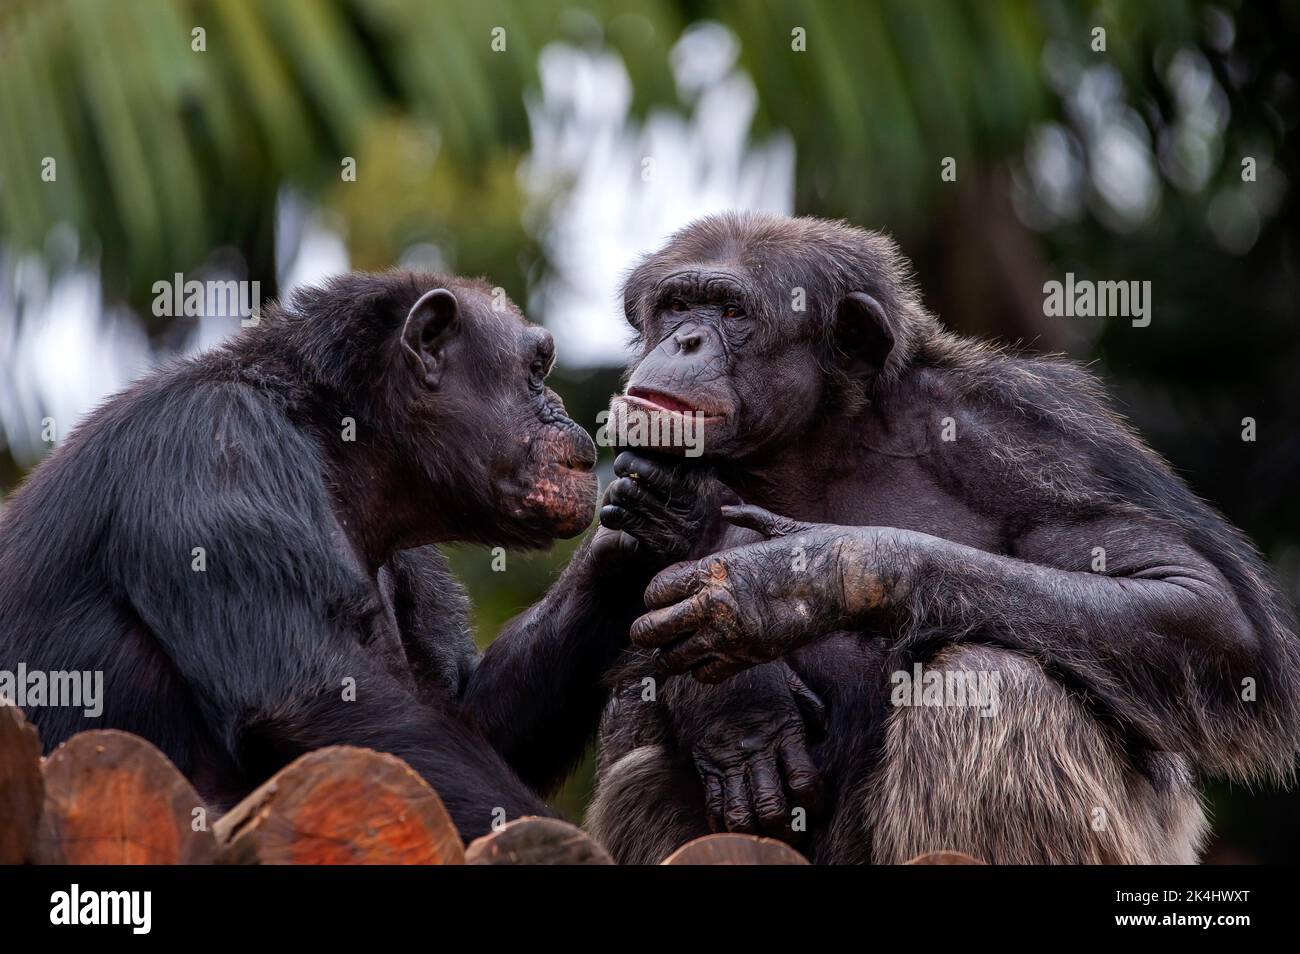 Chimpanzee, also known as chimp, showing their sociable behavior, is a species of great ape living mainly in the forest and savannah of  Africa. Stock Photo